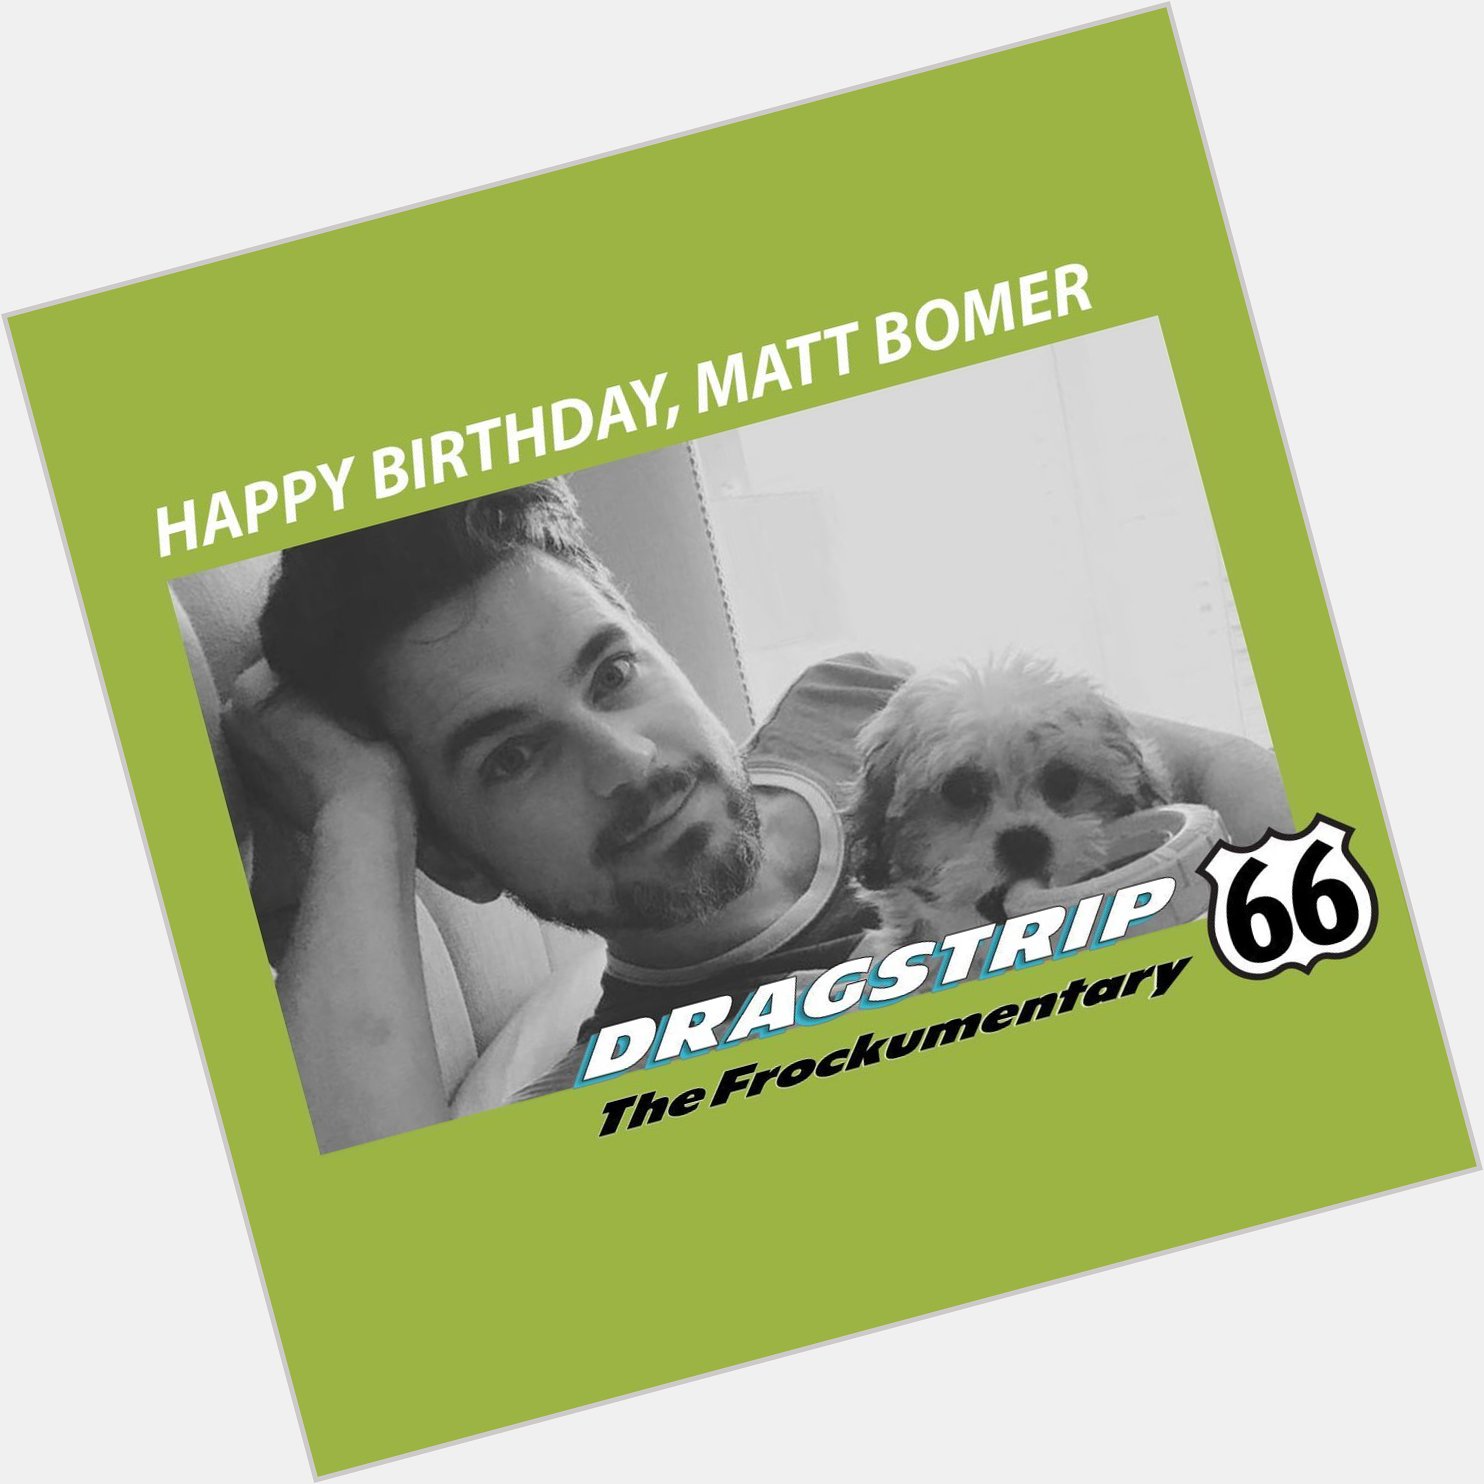 Happy Birthday to Matt Bomer from Dragstrip 66 the Frockumentary. FROCK ON!!   